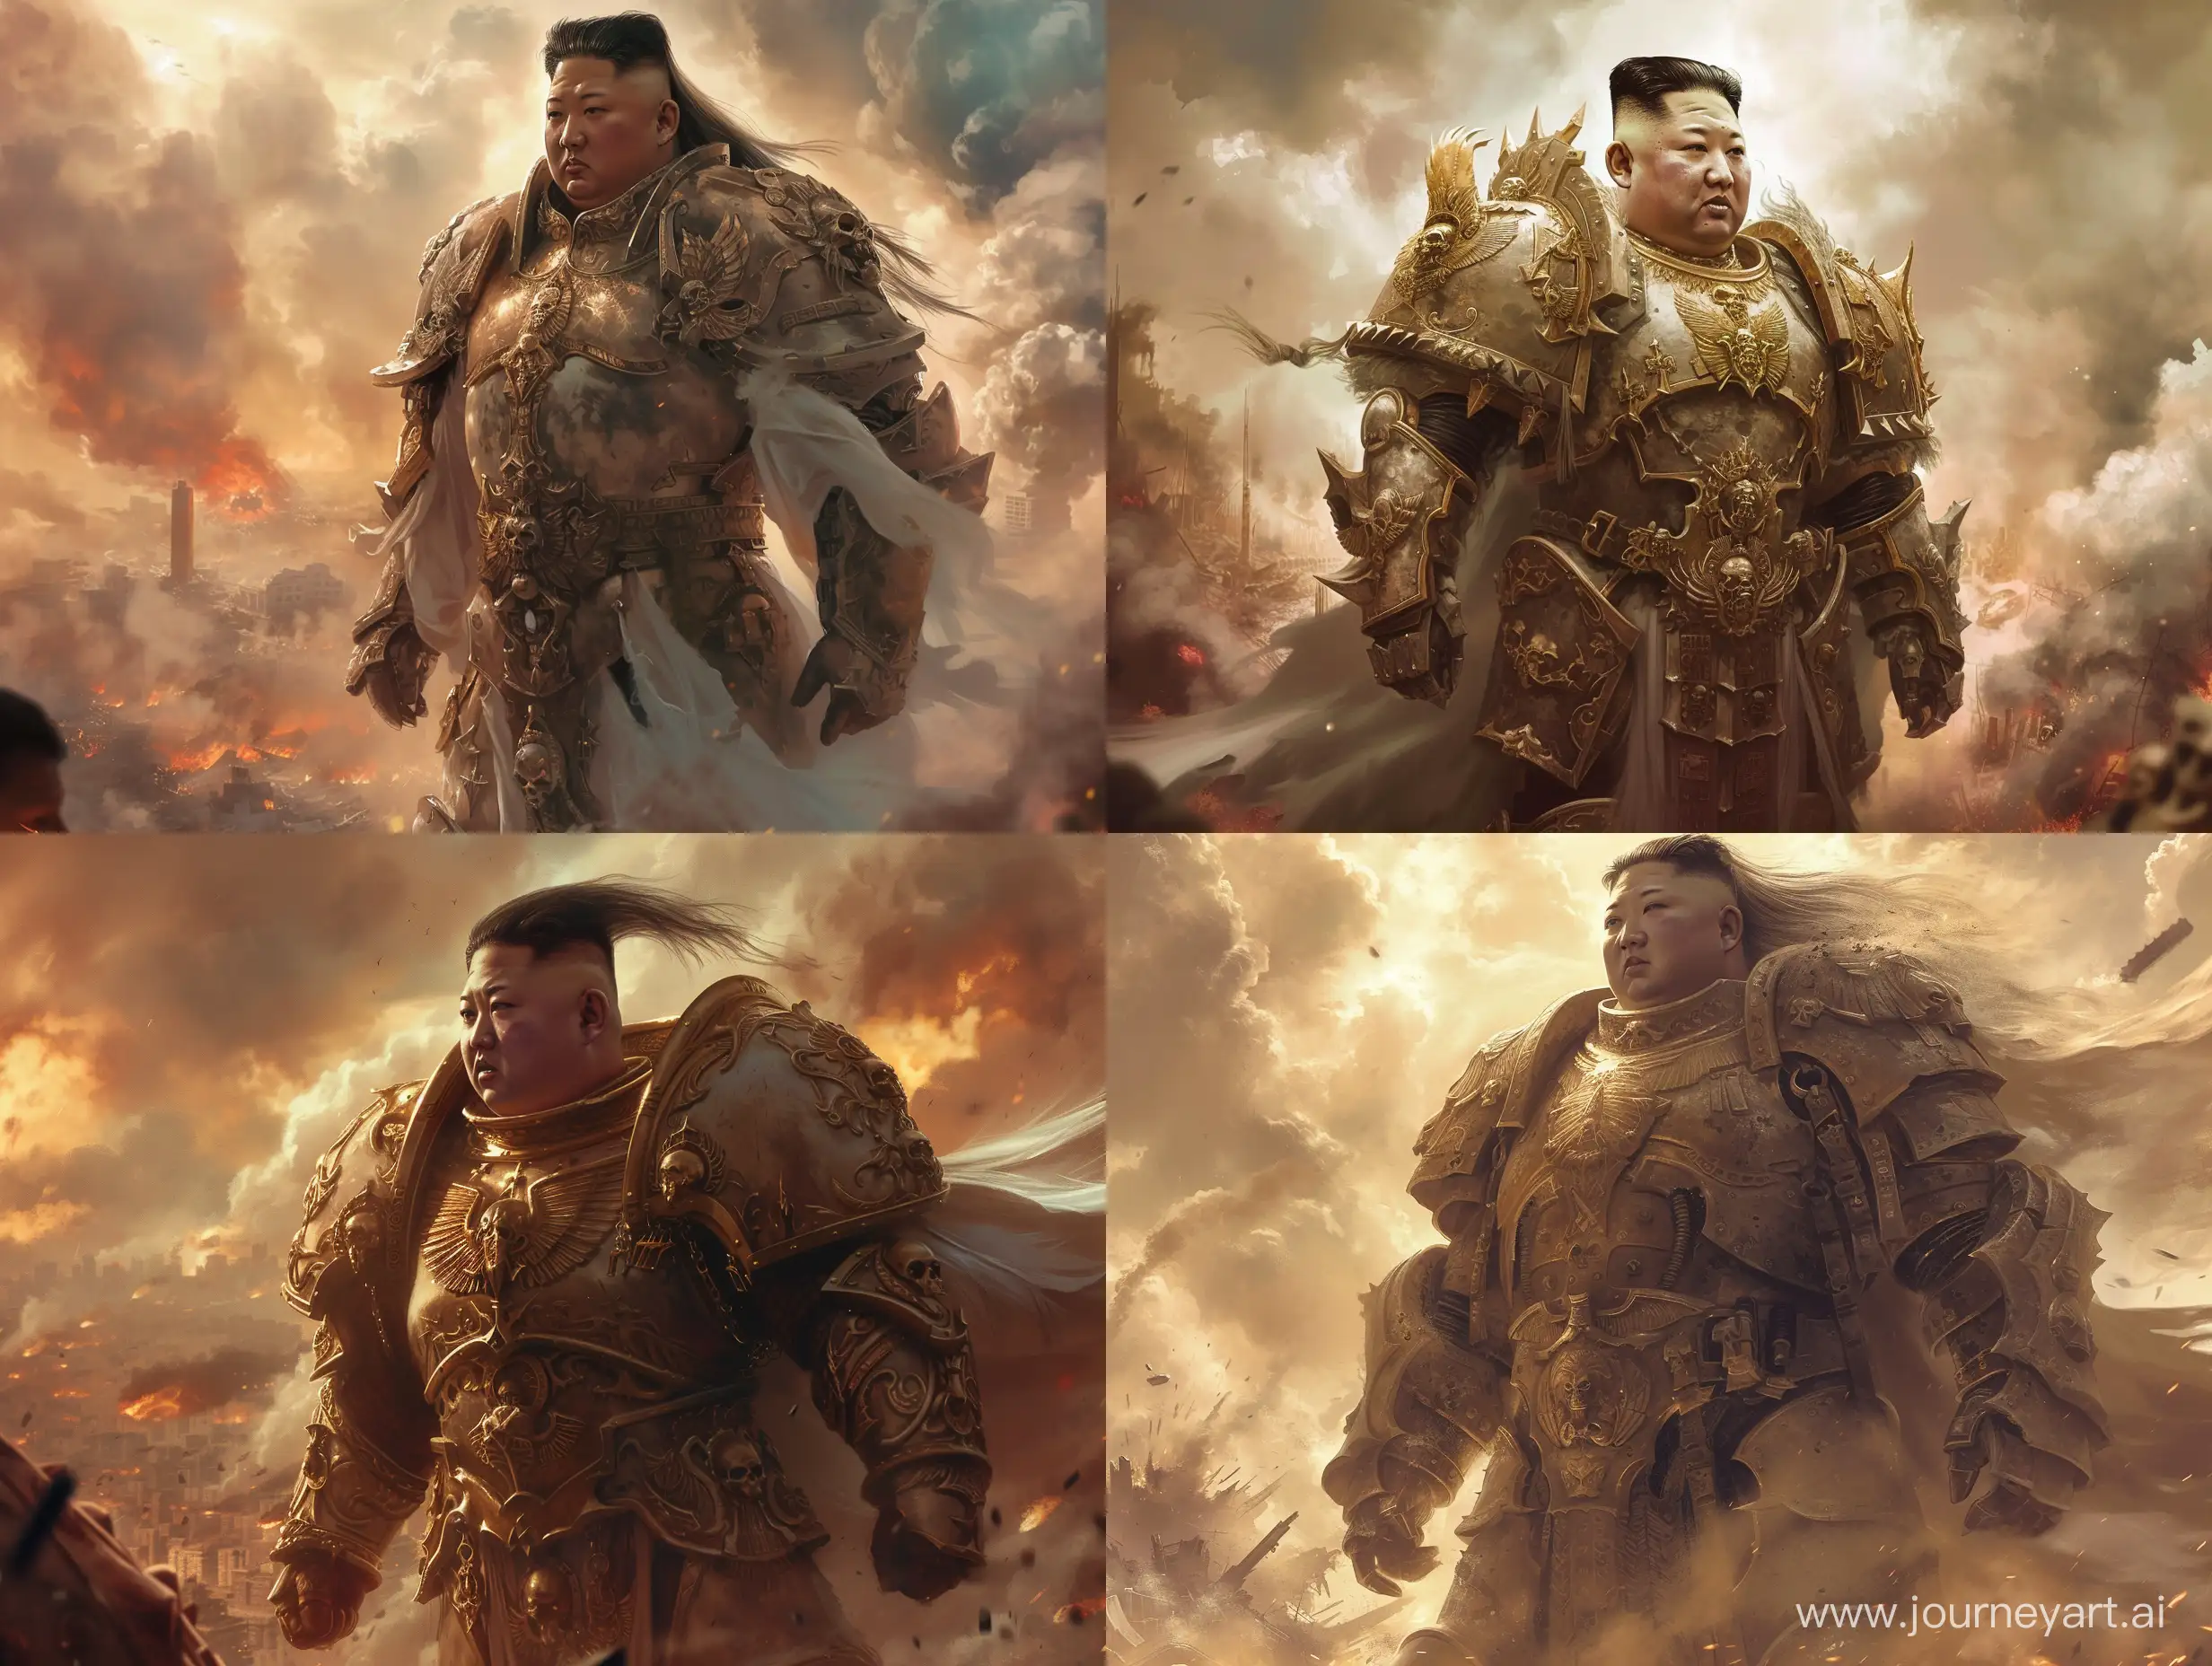 An epic scene of Kim Jong Un, the immortal warrior and god emperor of Warhammer 40k, standing tall and powerful amidst the devastation of an epic nuclear war. His massive frame is adorned with intricately designed armor that glistens in the light, reflecting his divine status. His face, captured in a soft, diffused light, exudes an aura of determination and strength. His long, flowing hair, meticulously styled, billows gently behind him, adding to the sense of movement and drama in the image. The background is a chaotic tapestry of destruction: cities reduced to rubble, clouds of dust and debris obscuring the sky, and the eerie glow of nuclear fire painting the horizon.